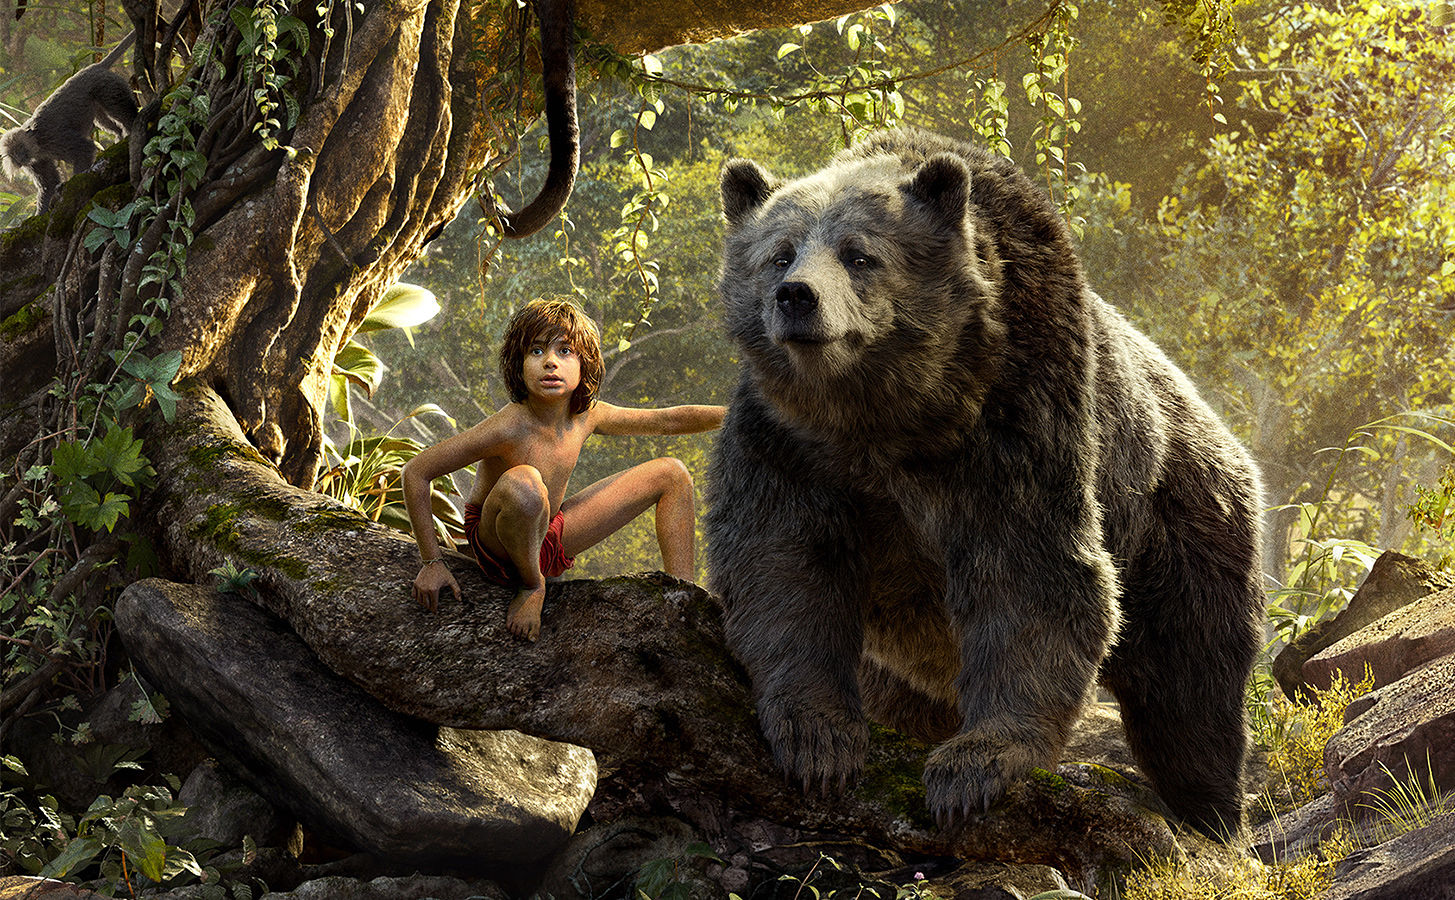 'The Jungle Book' movie Box office collections